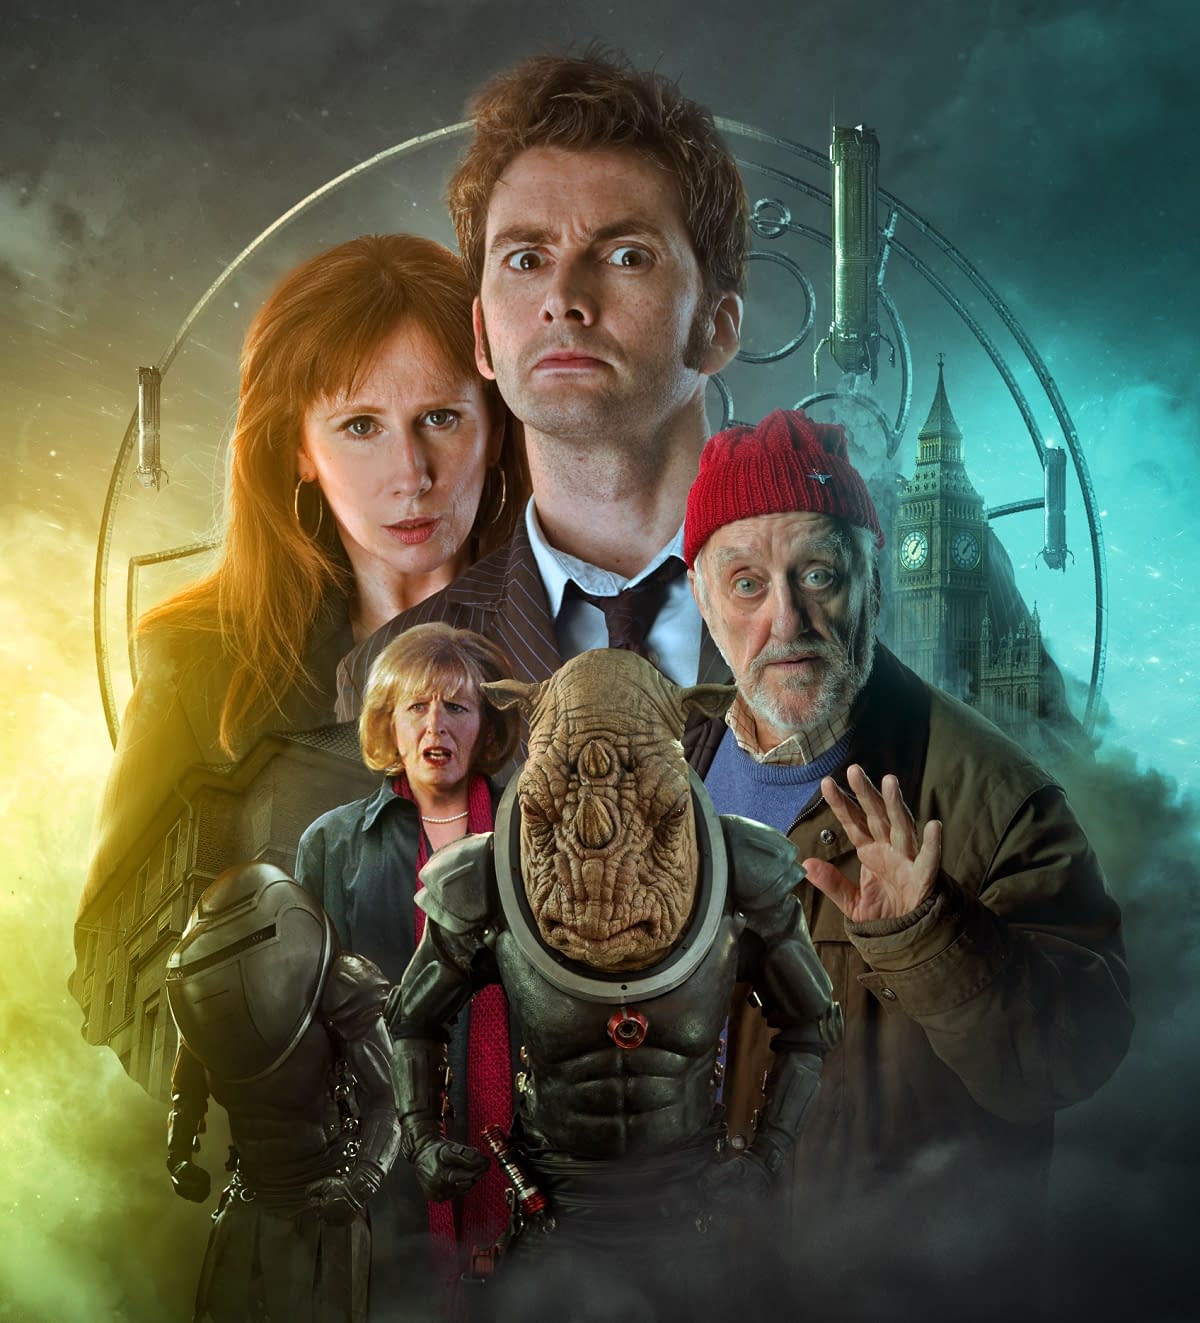 Big Finish's 'Doctor Who: The Tenth Doctor Adventures Volume 03' Reunites David Tennant, Catherine Tate